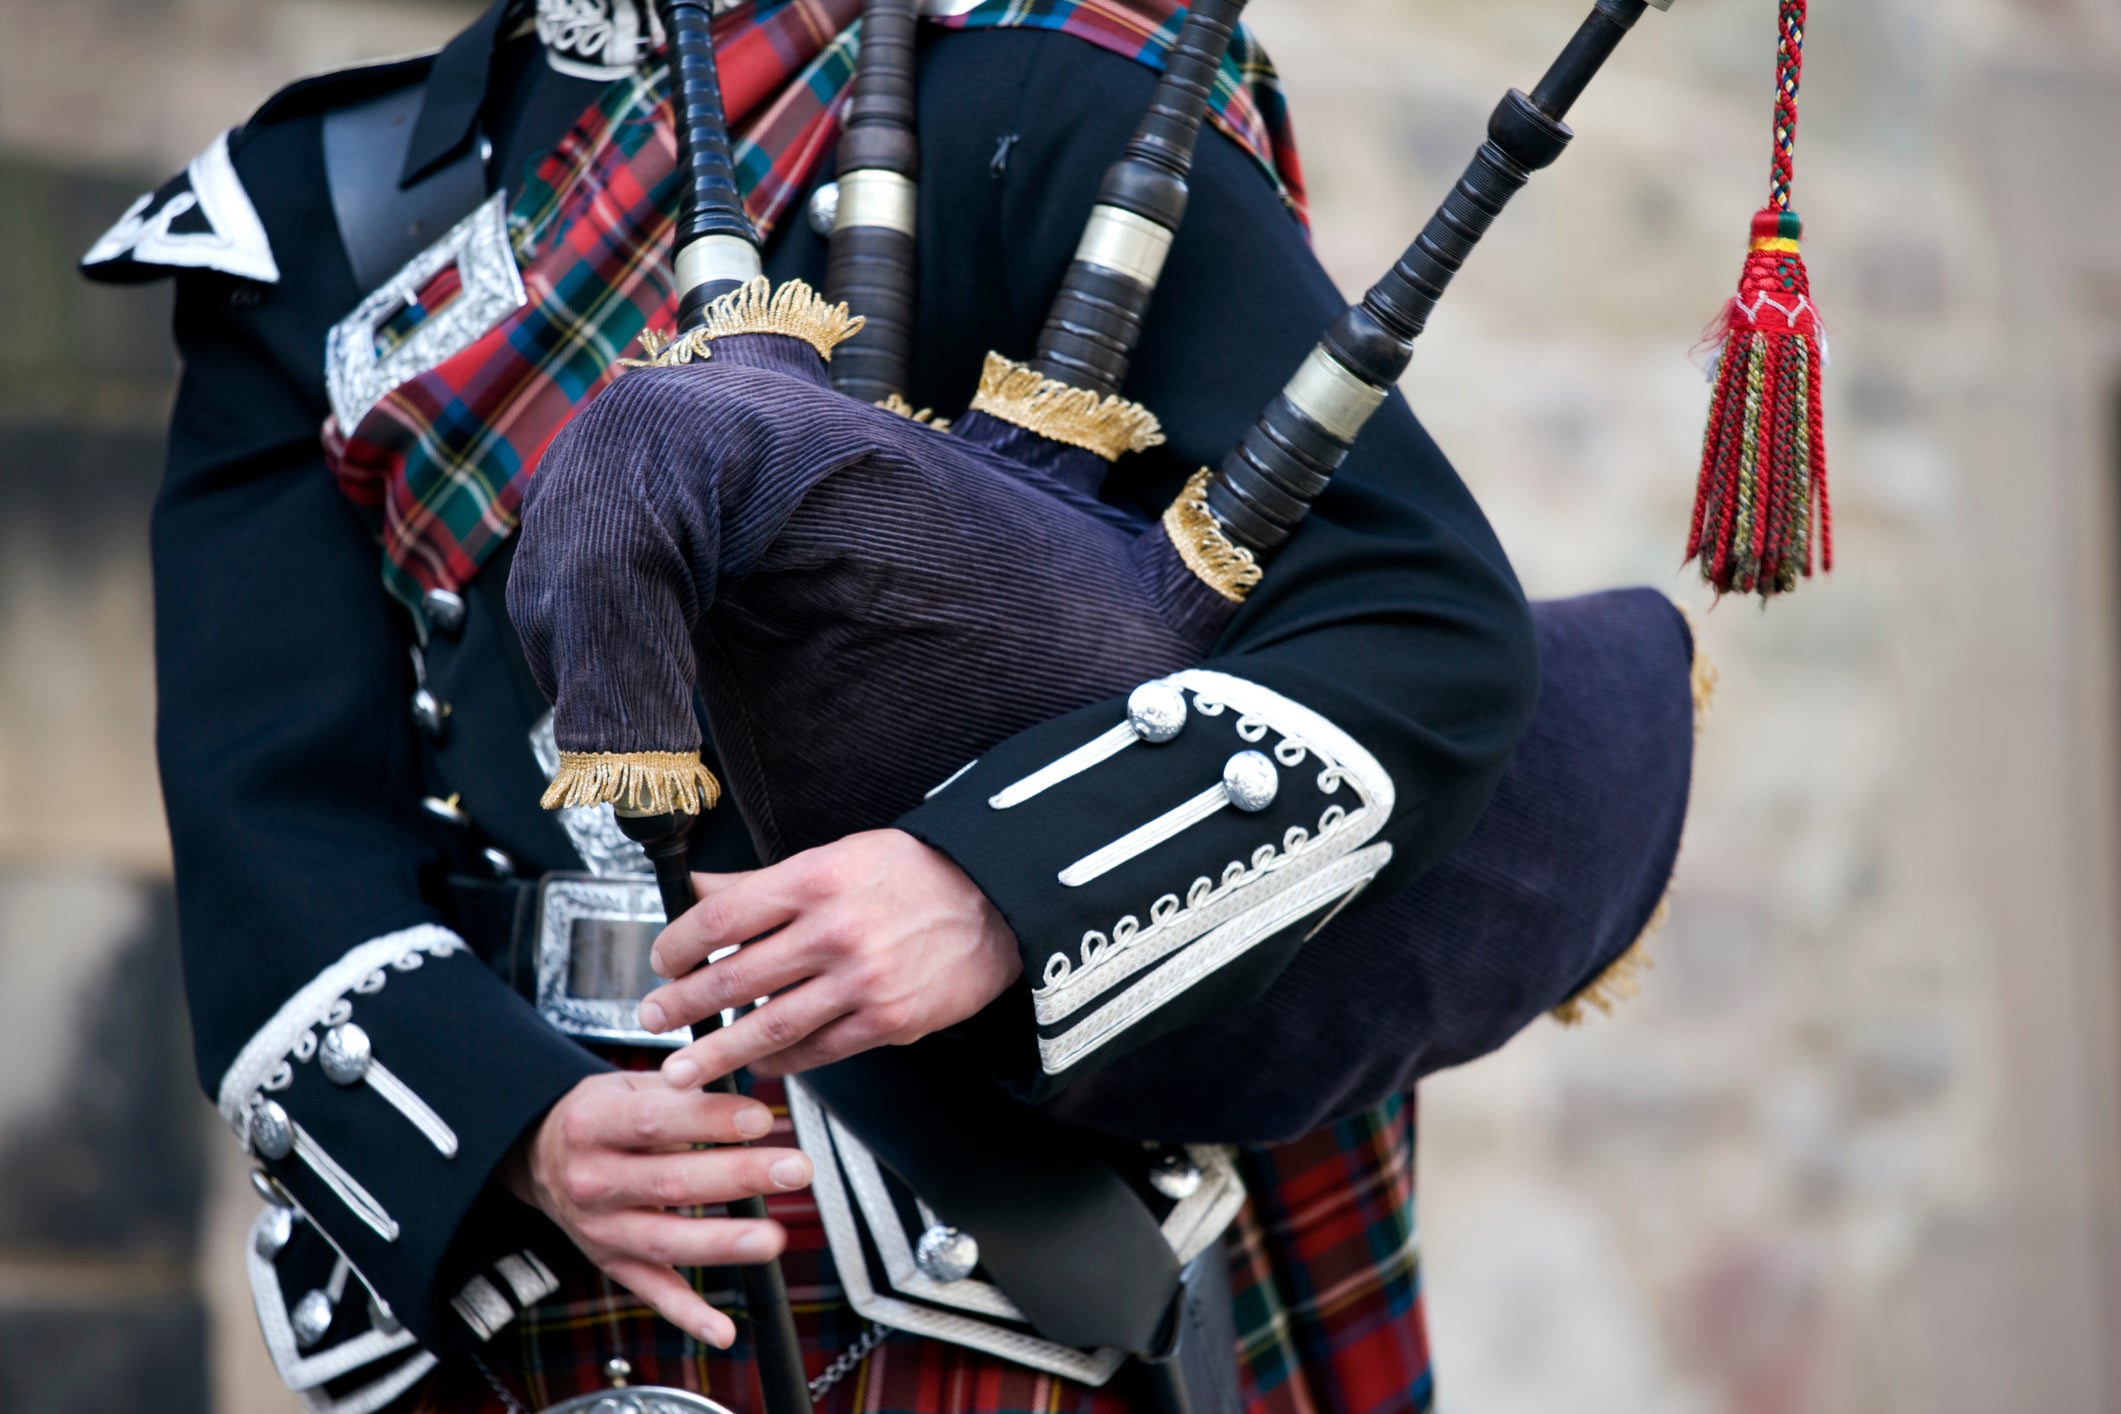 Bagpipes loom large in Burns Night celebrations